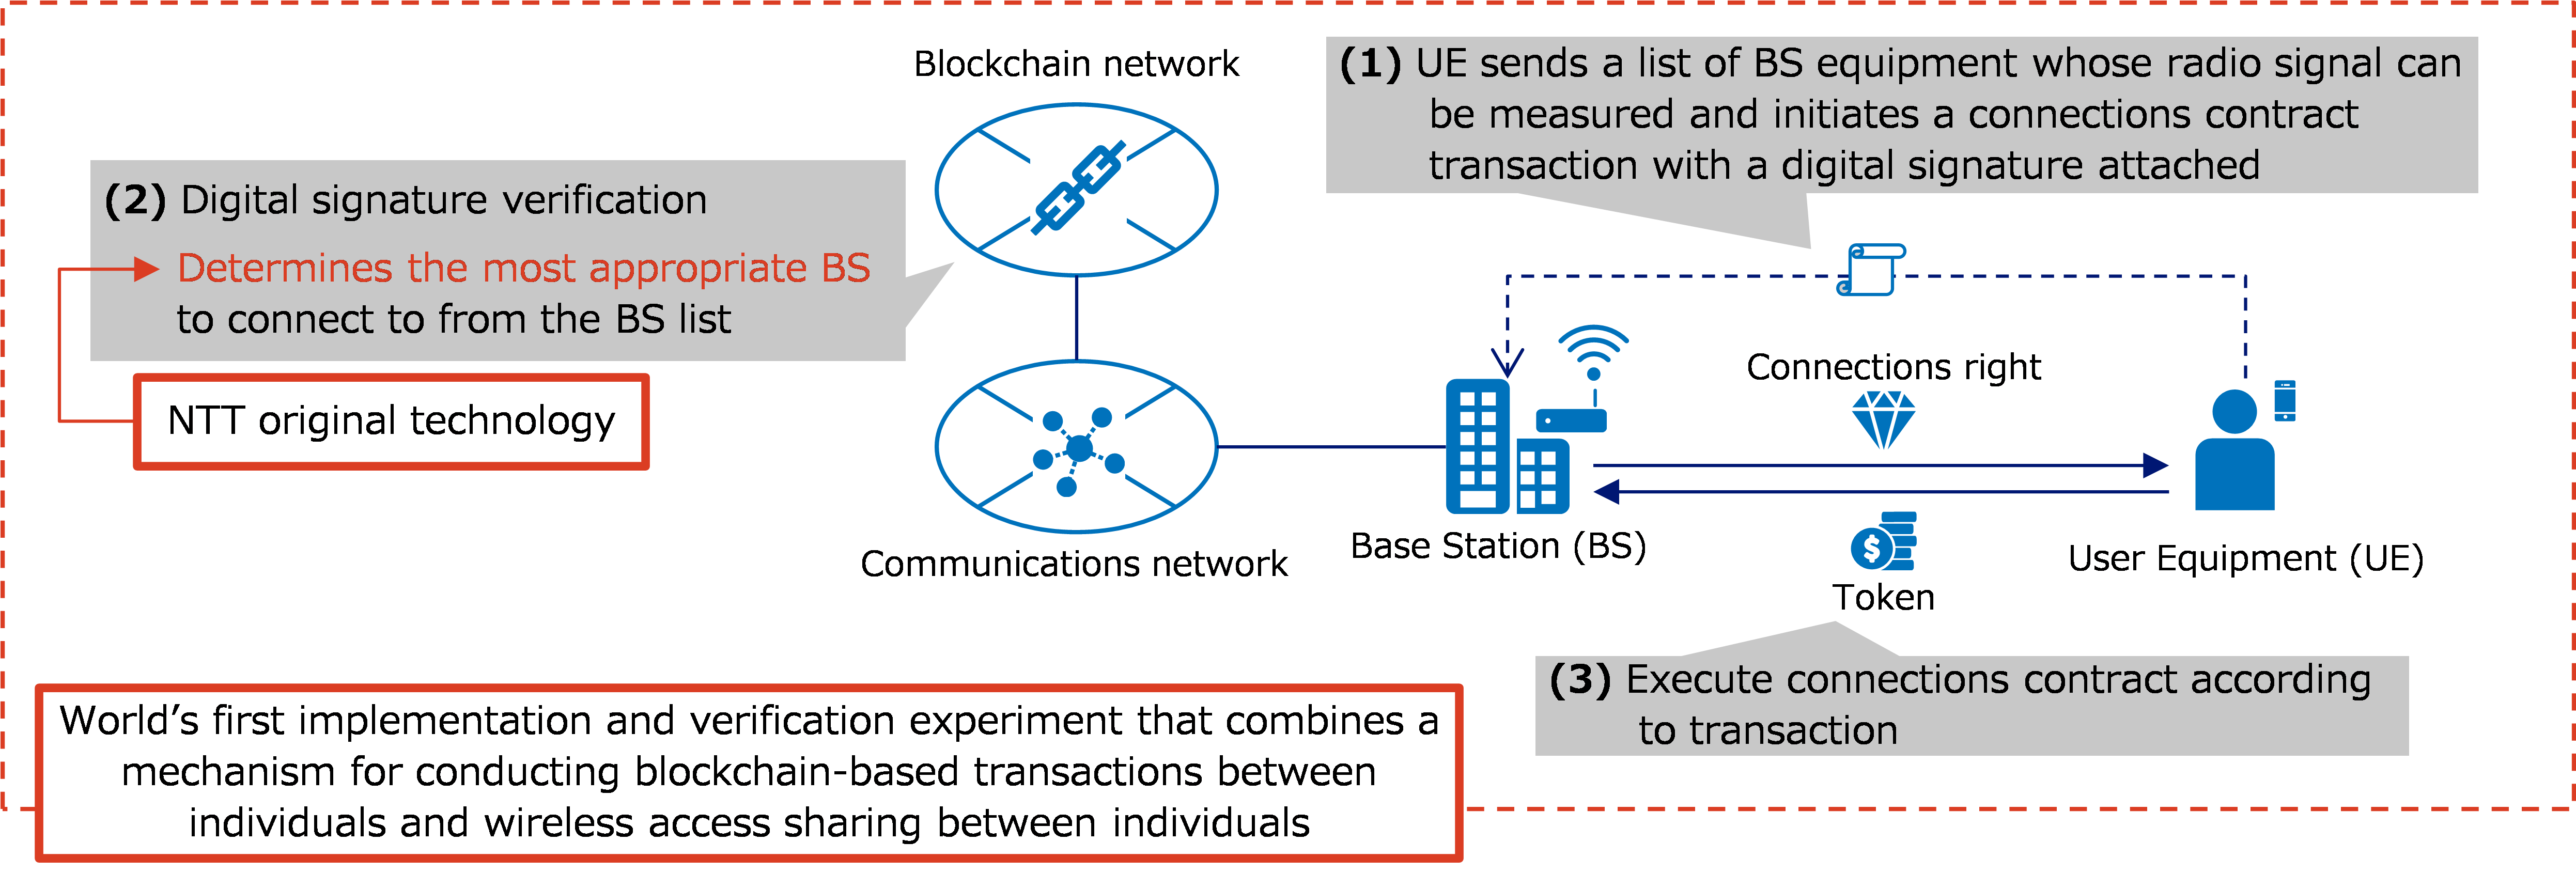 Fig. 1 Outline of flow for concluding a connections contract using blockchain